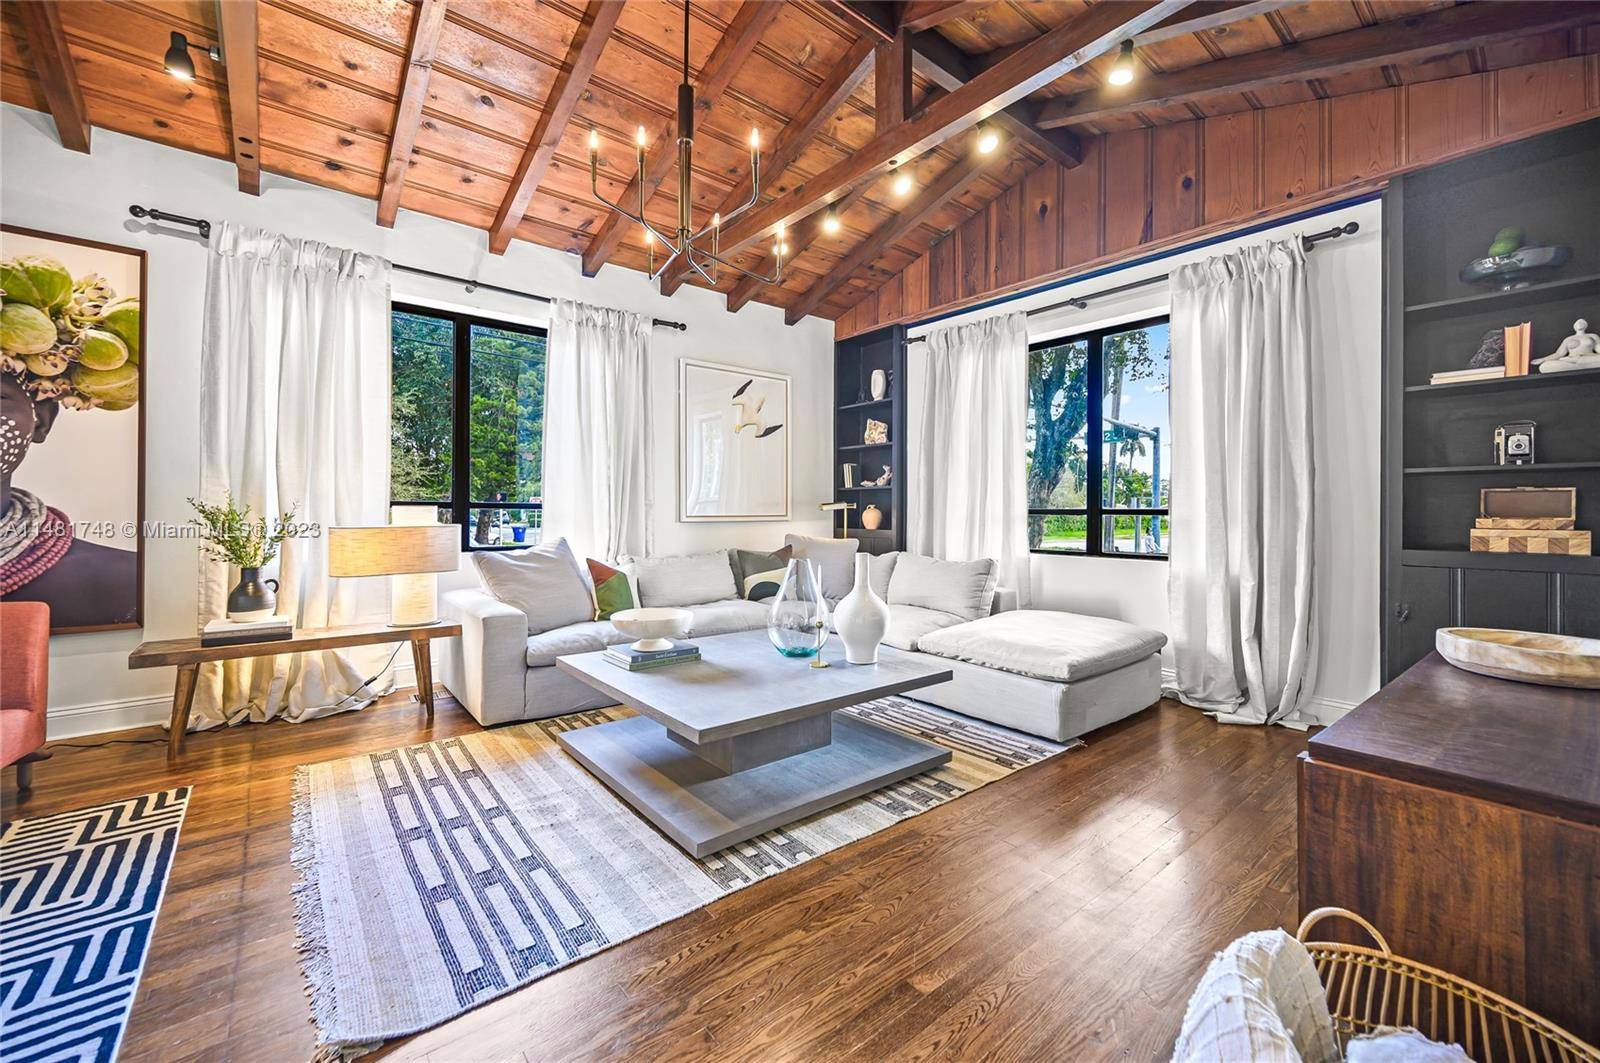 Charming Luxe Spanish style home in heart of Miami boasts lots of natural lighting and great outdoor entertainment space.